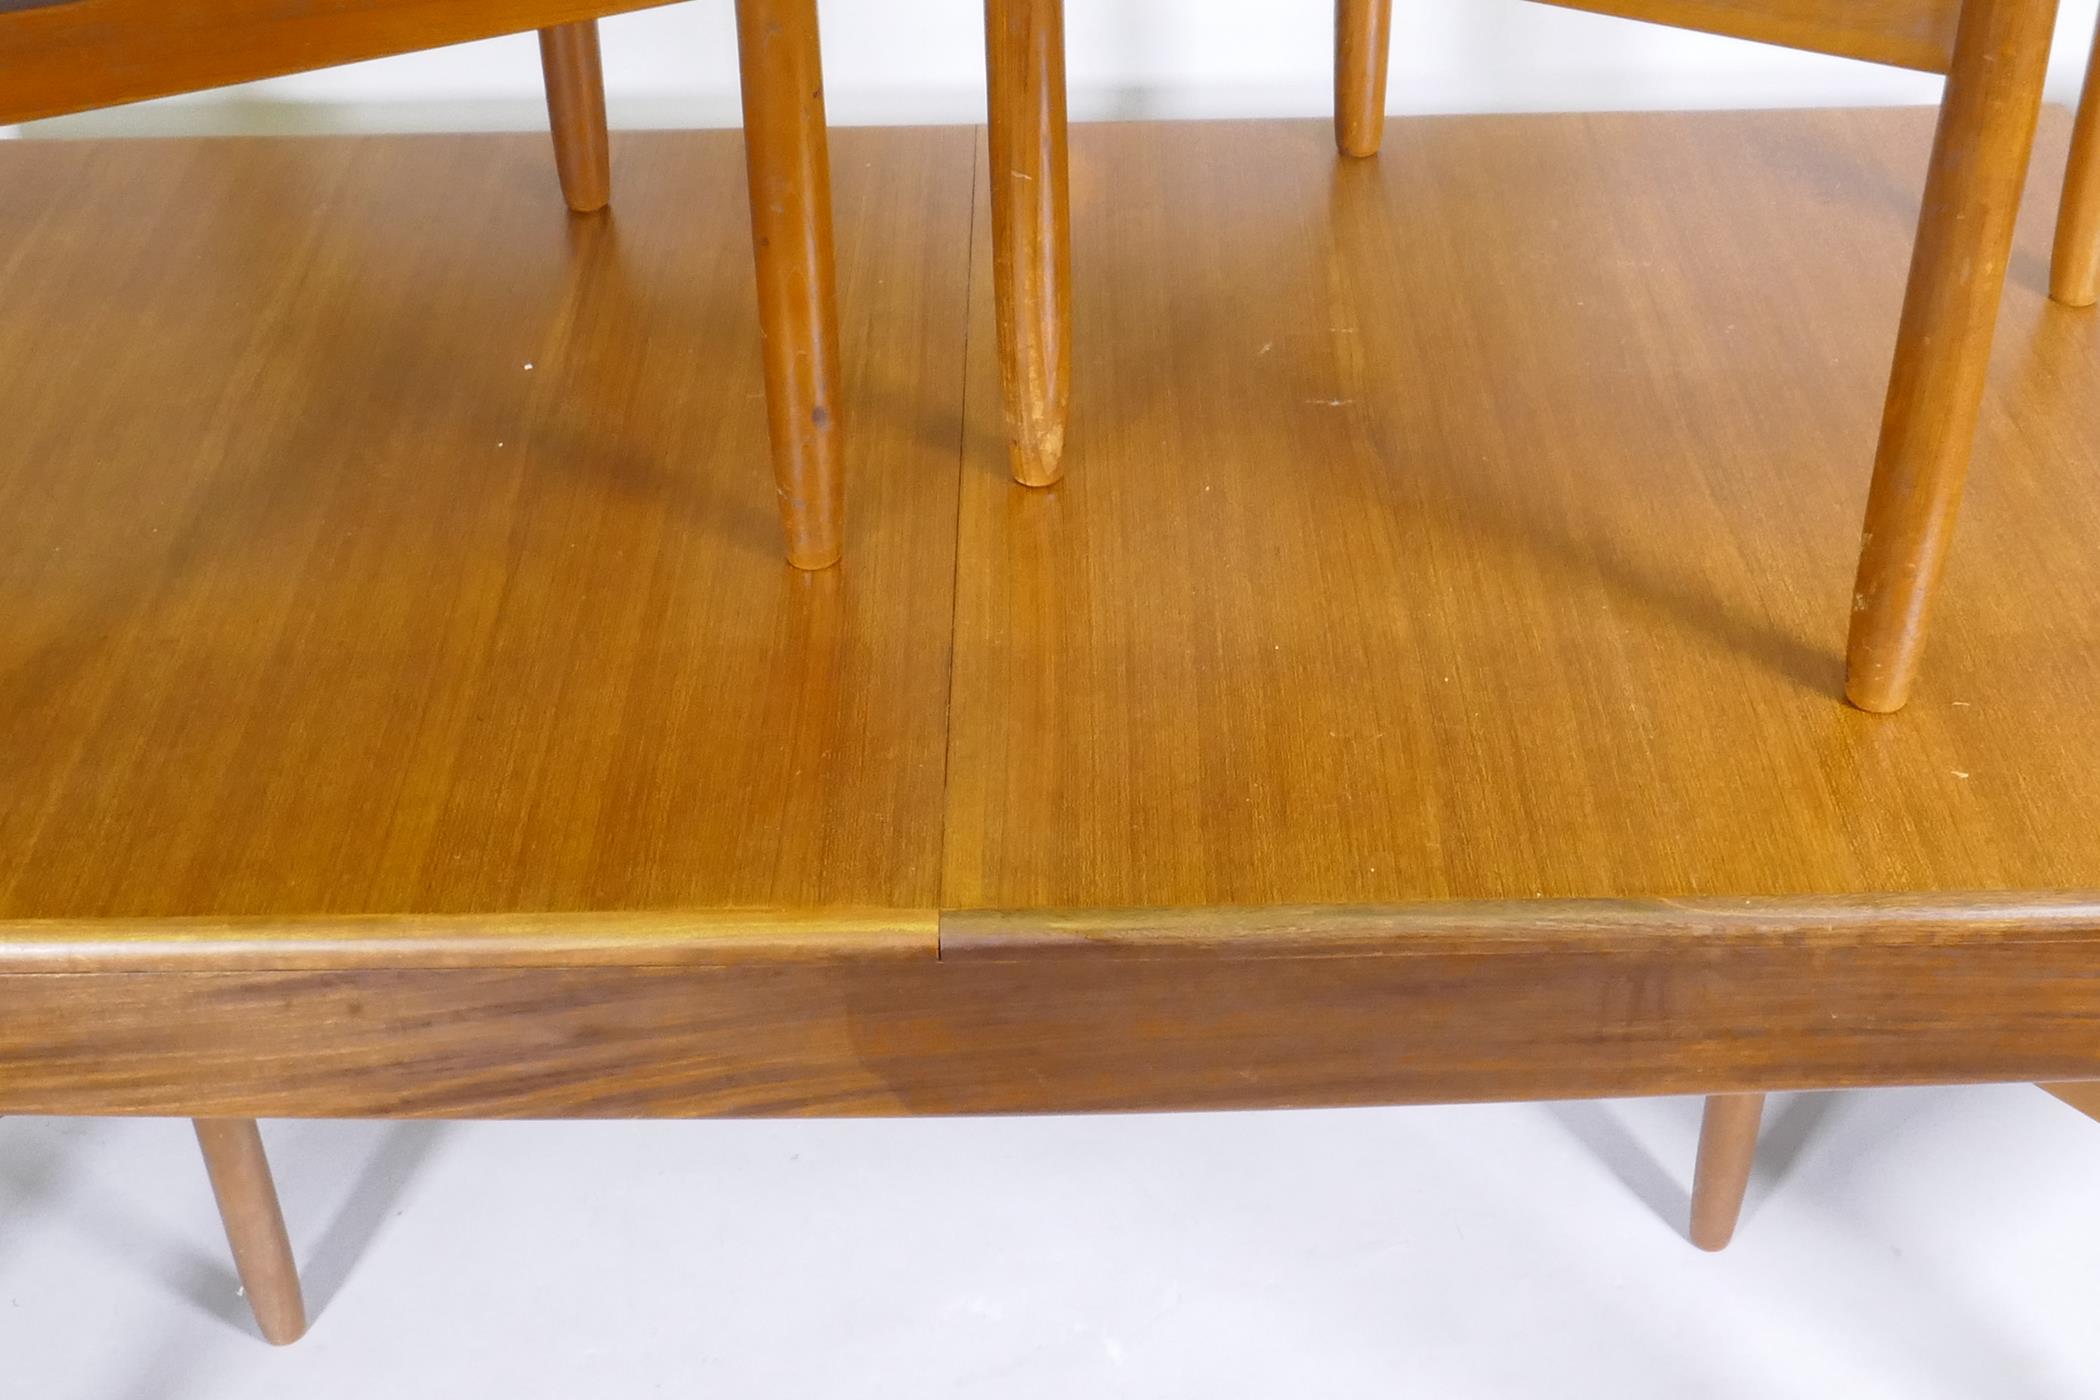 A mid century teak extending dining table, with folding leaf, designed by John Herbert for A. - Image 3 of 5